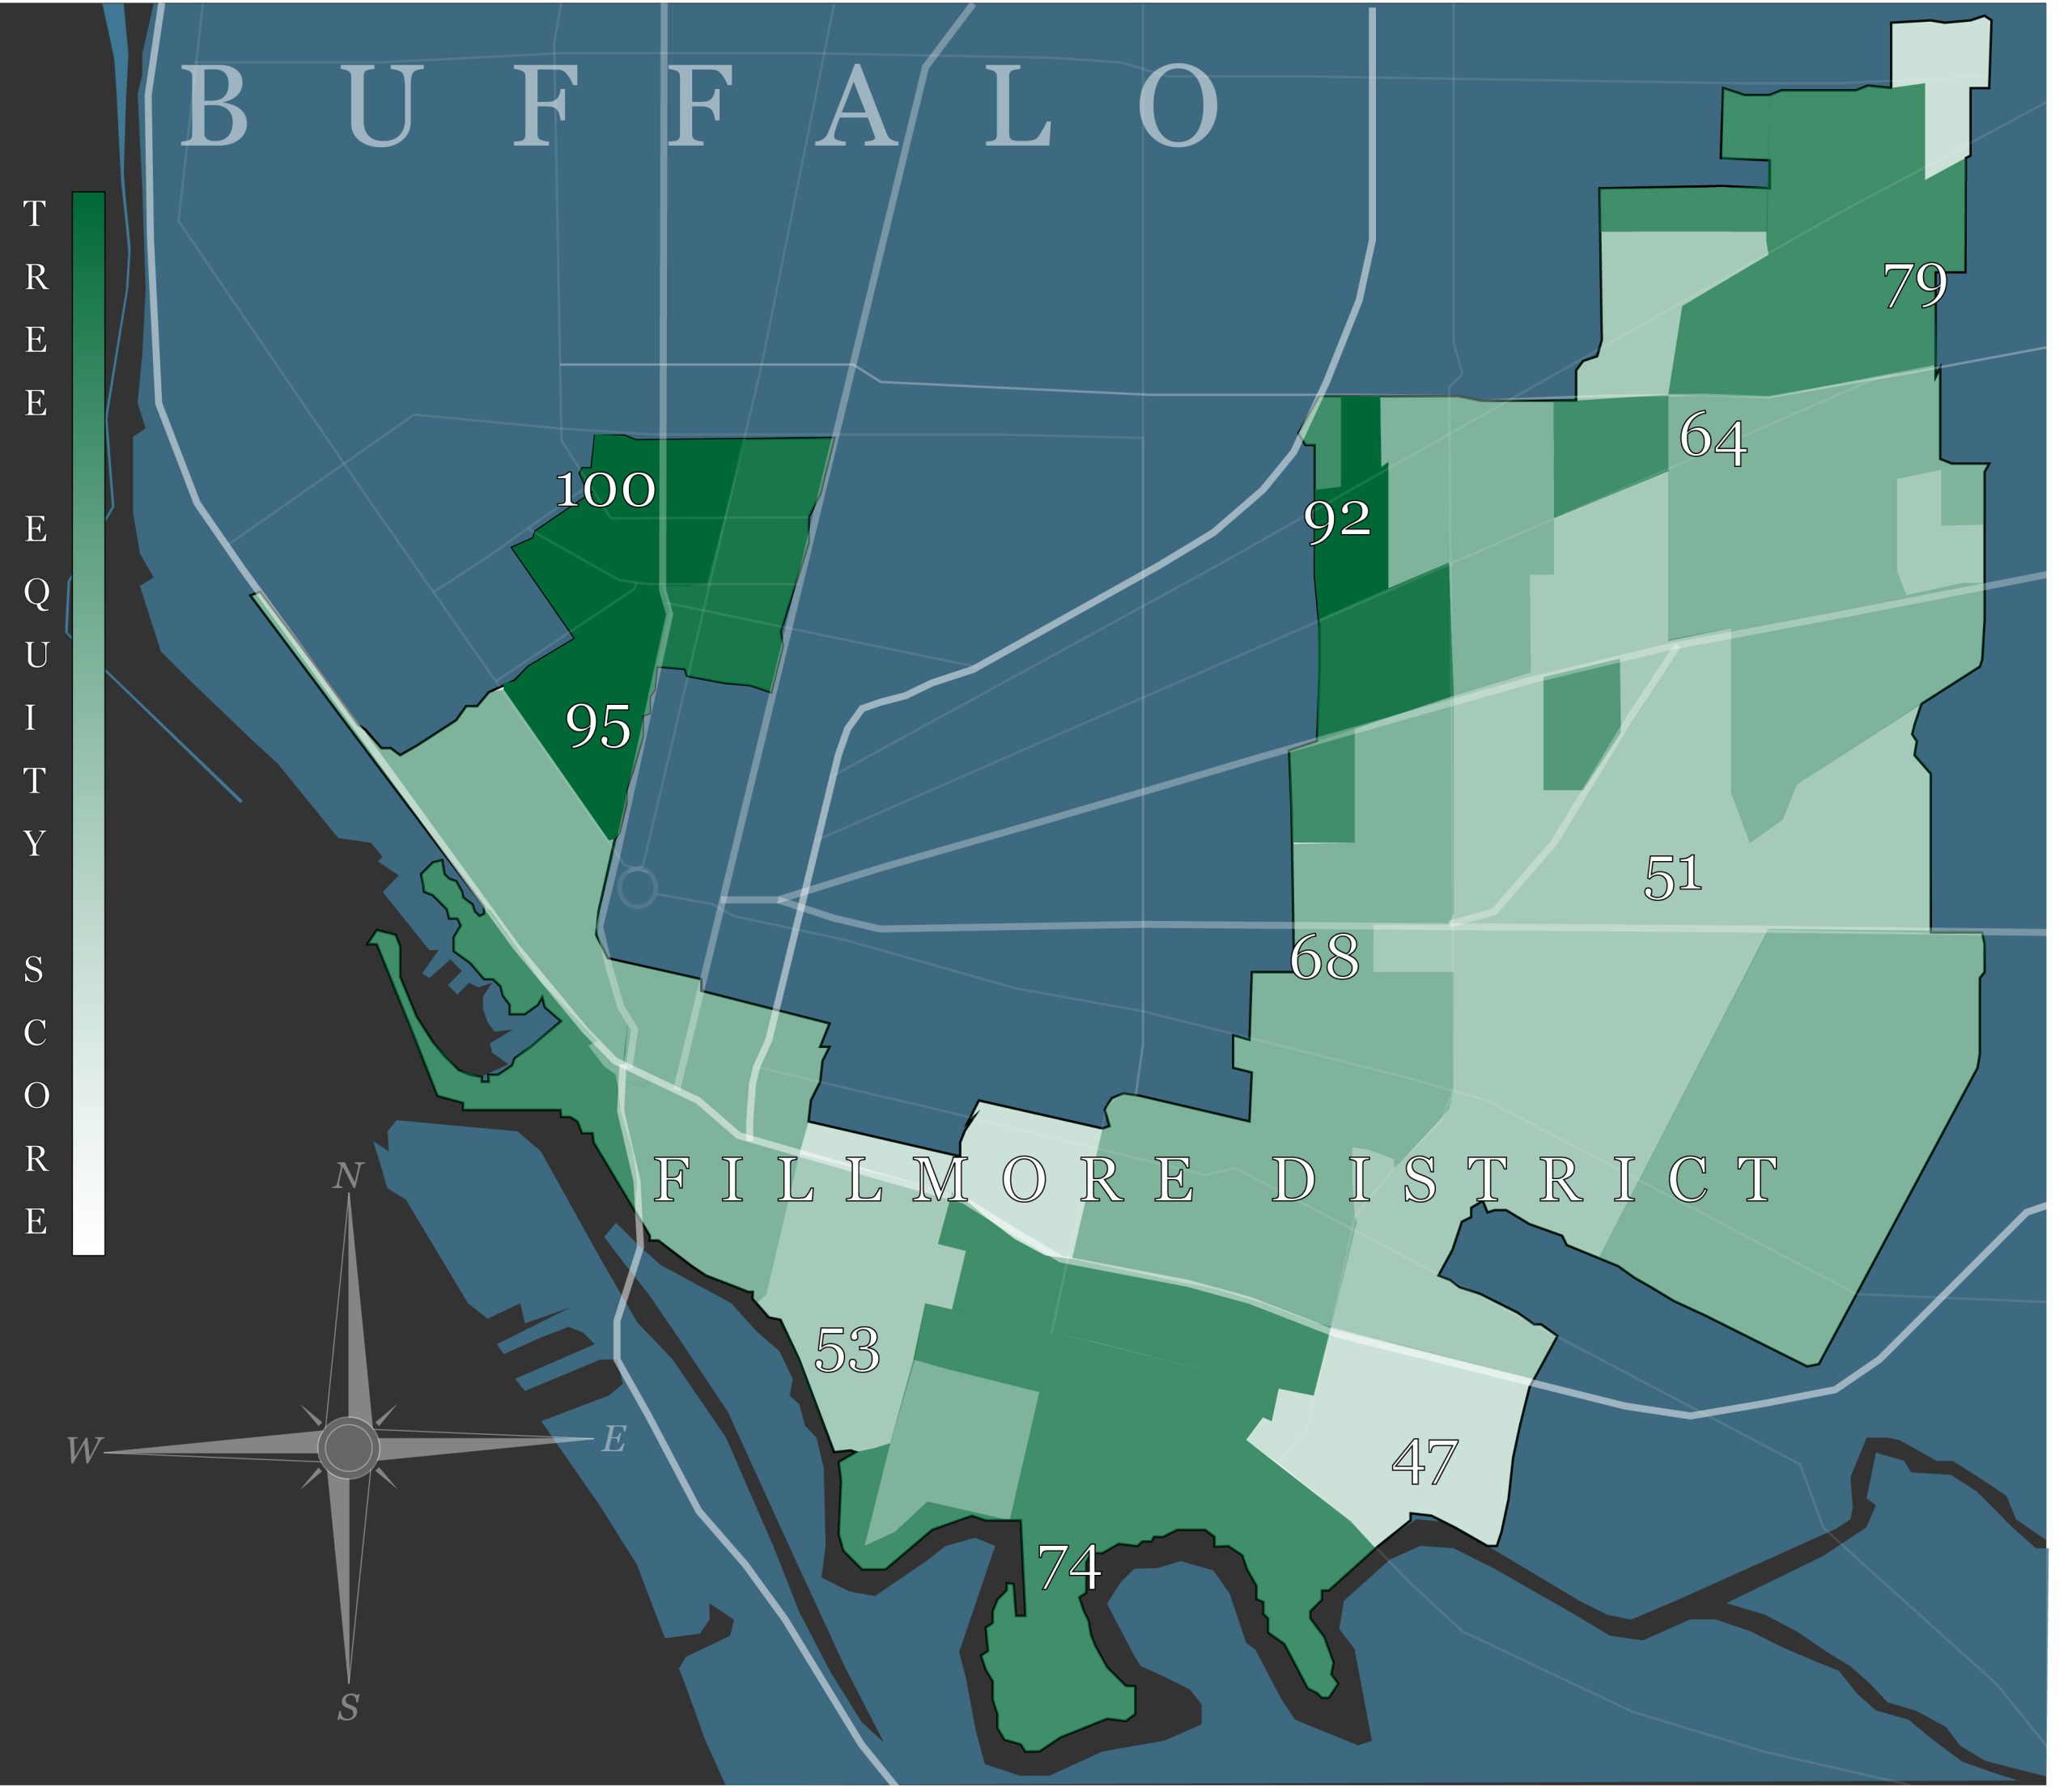 A map of Buffalo's Fillmore District, depicting the difference of tree-coverage between different neighborhoods. The greener the area, the higher the tree equity is in that location. 